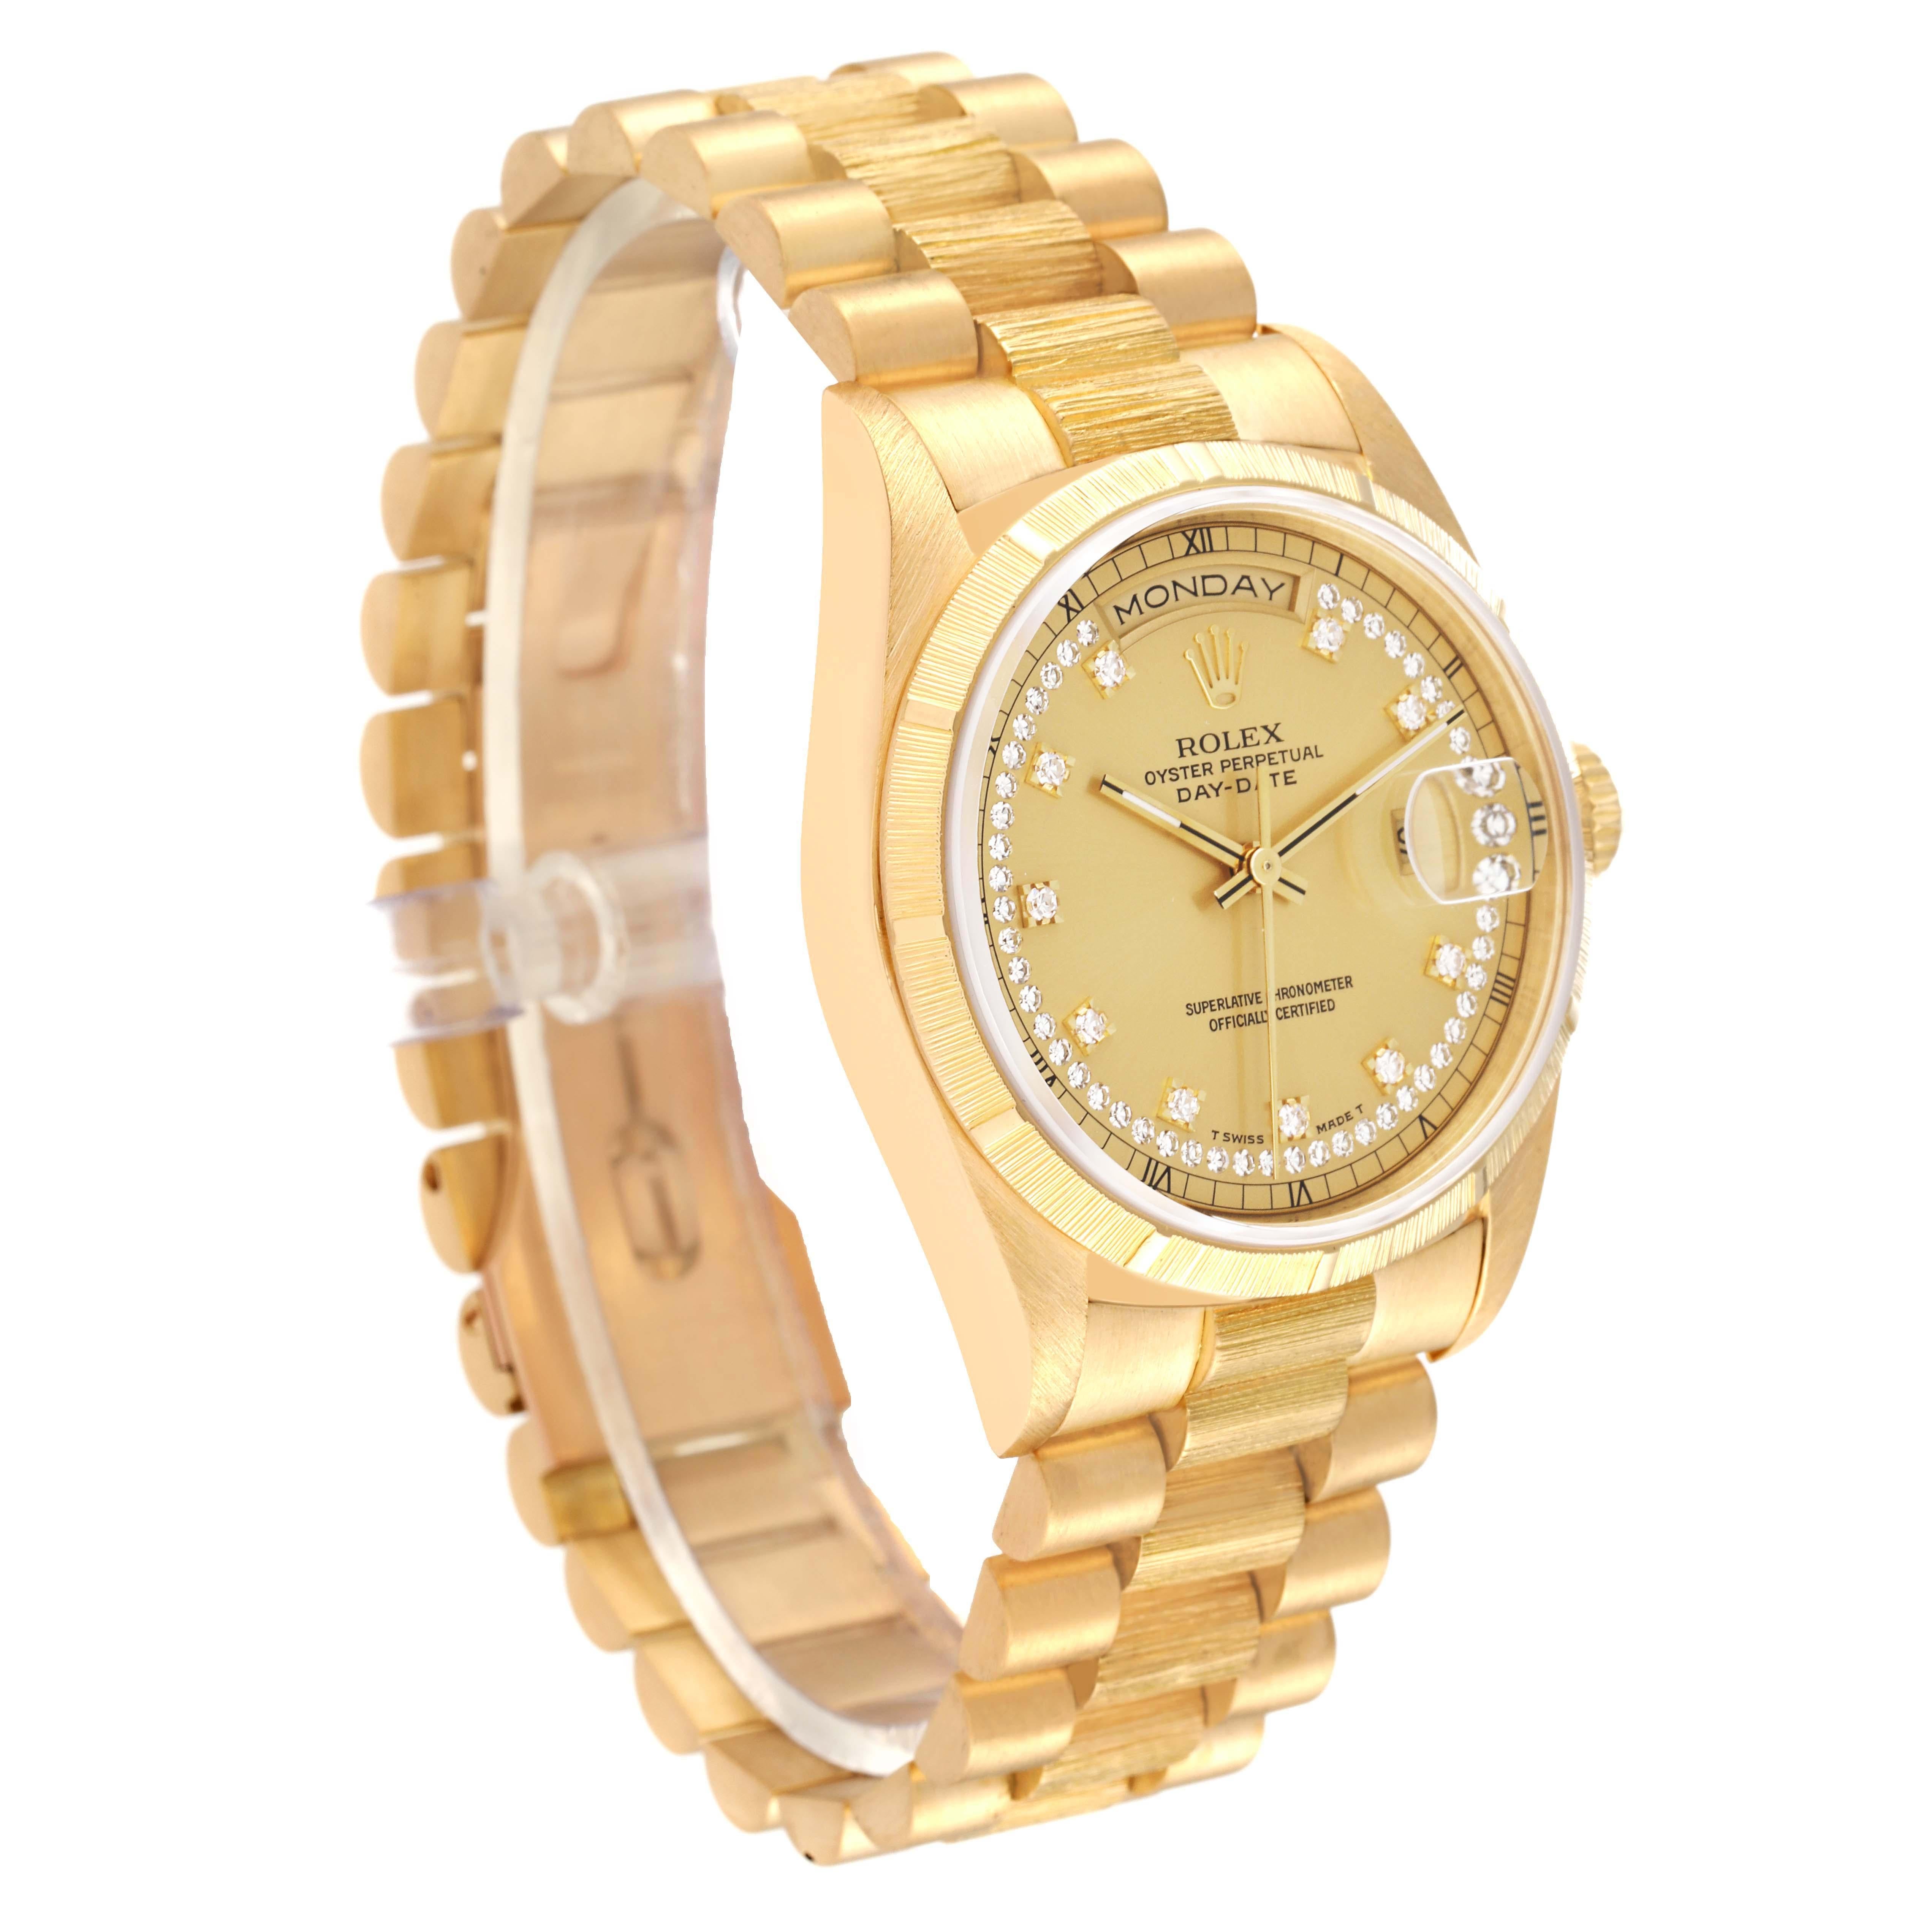 Rolex President Day-Date Yellow Gold Bark Diamond Dial Mens Watch 18248 In Excellent Condition For Sale In Atlanta, GA